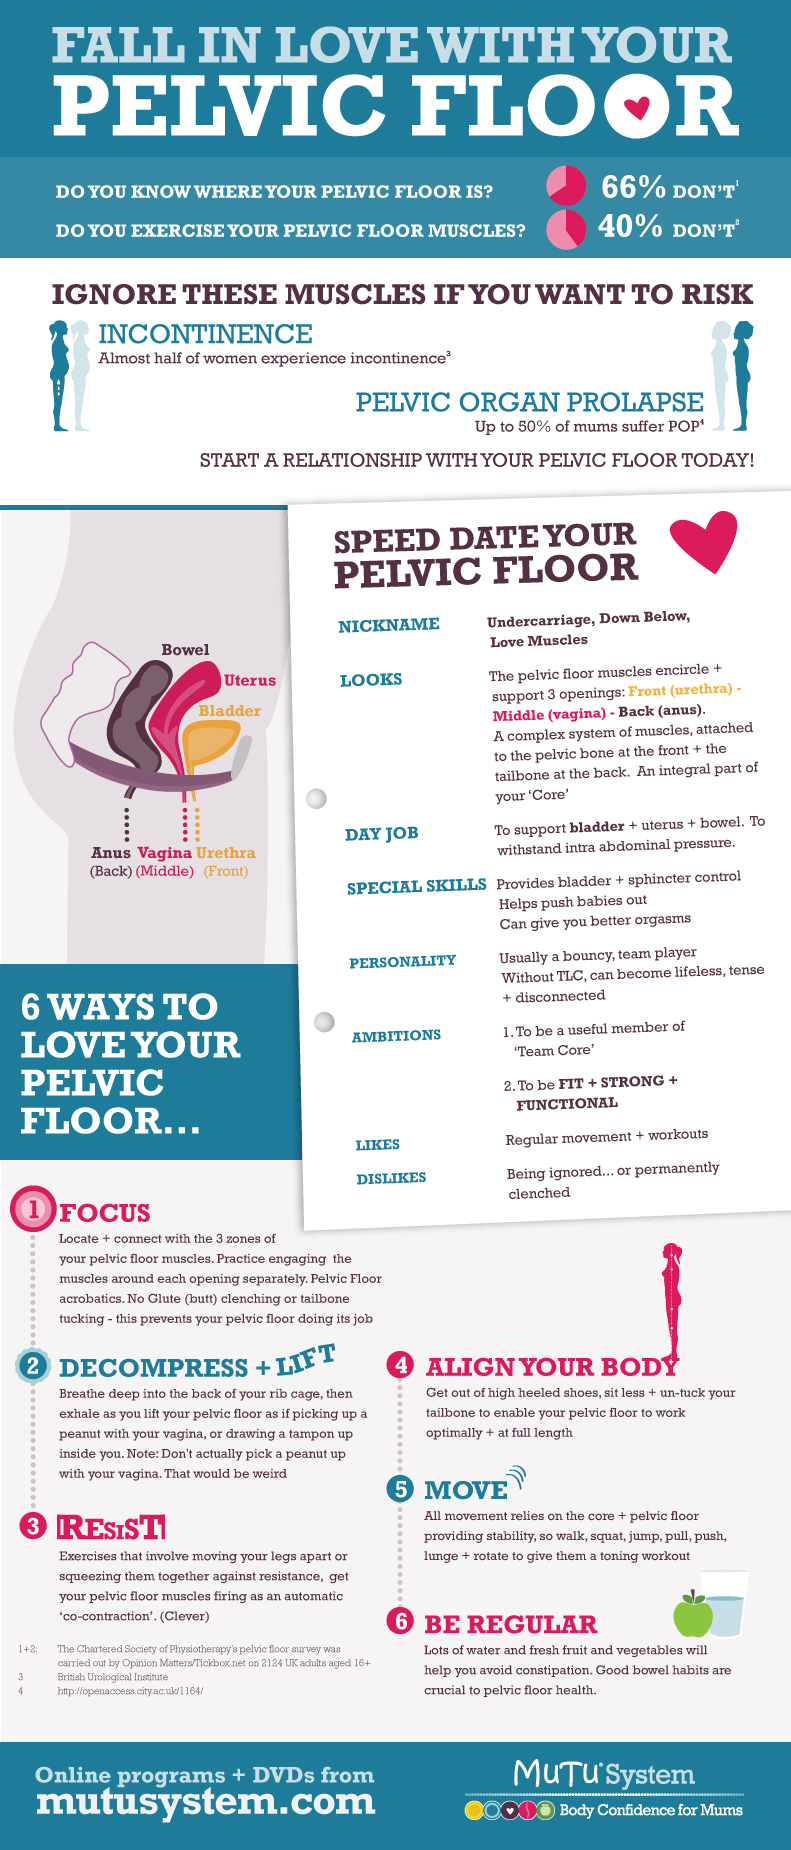 Fall In Love With Your Pelvic Floor